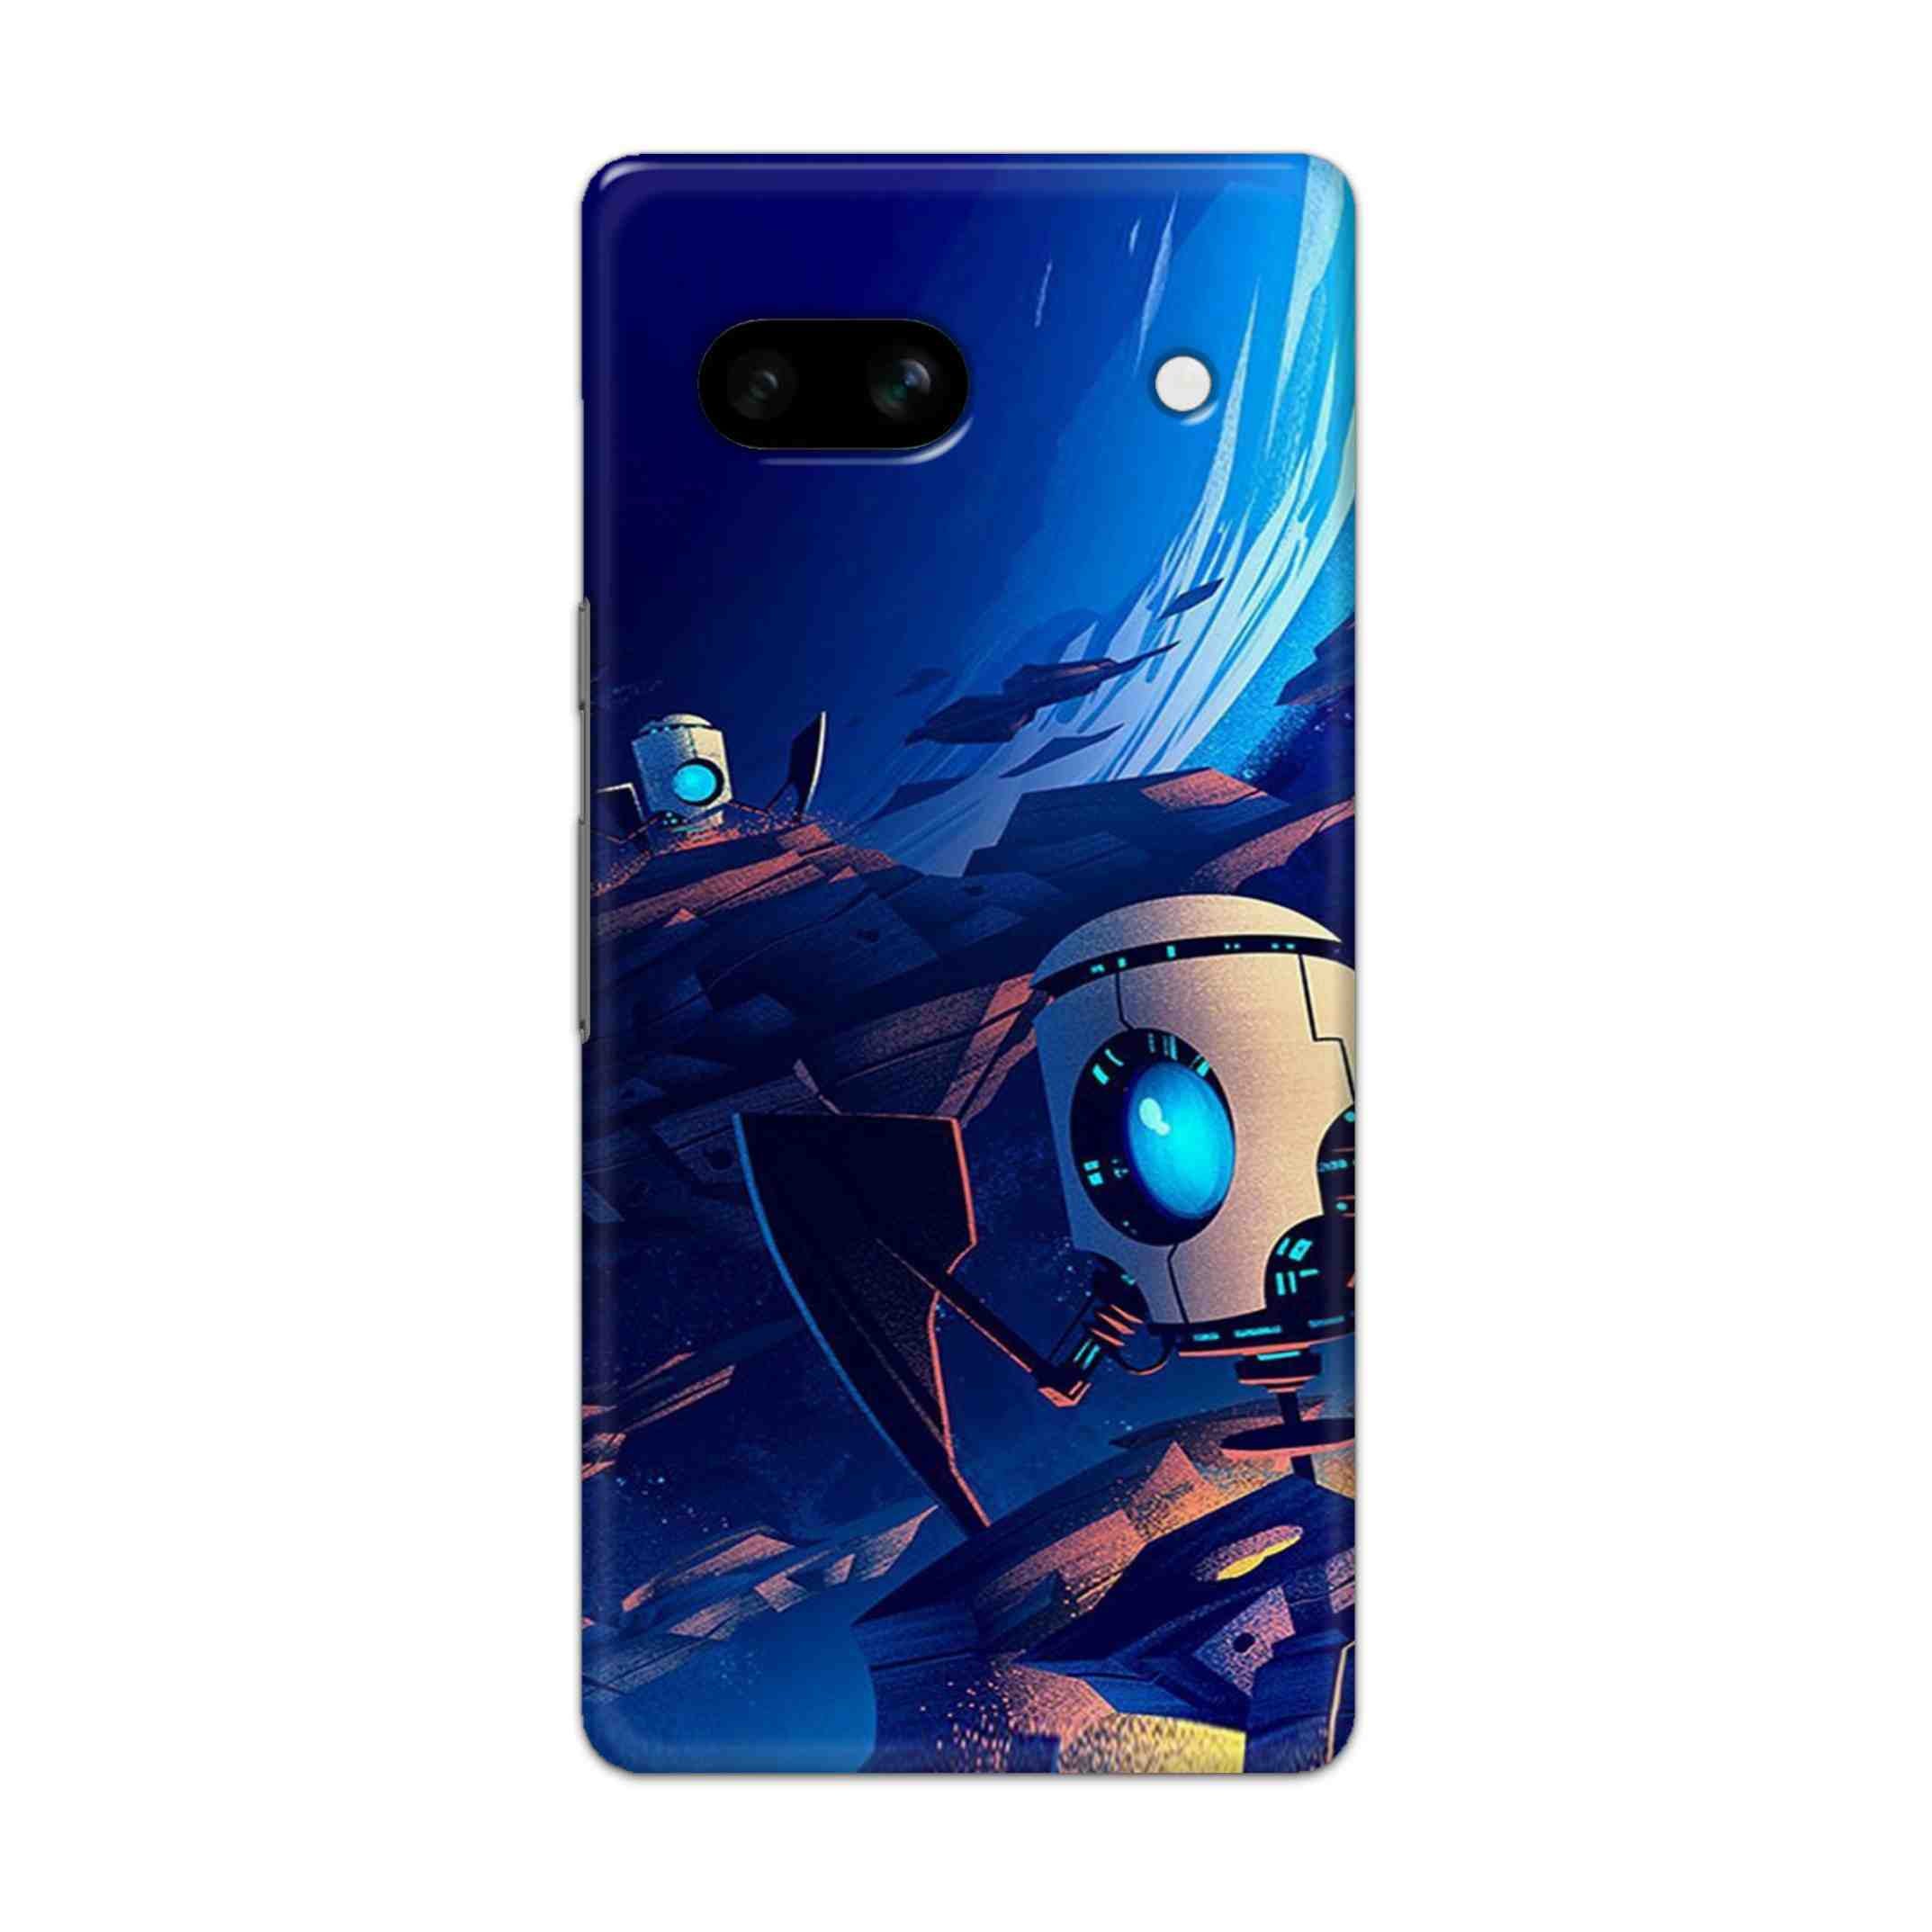 Buy Spaceship Hard Back Mobile Phone Case/Cover For Google Pixel 7A Online